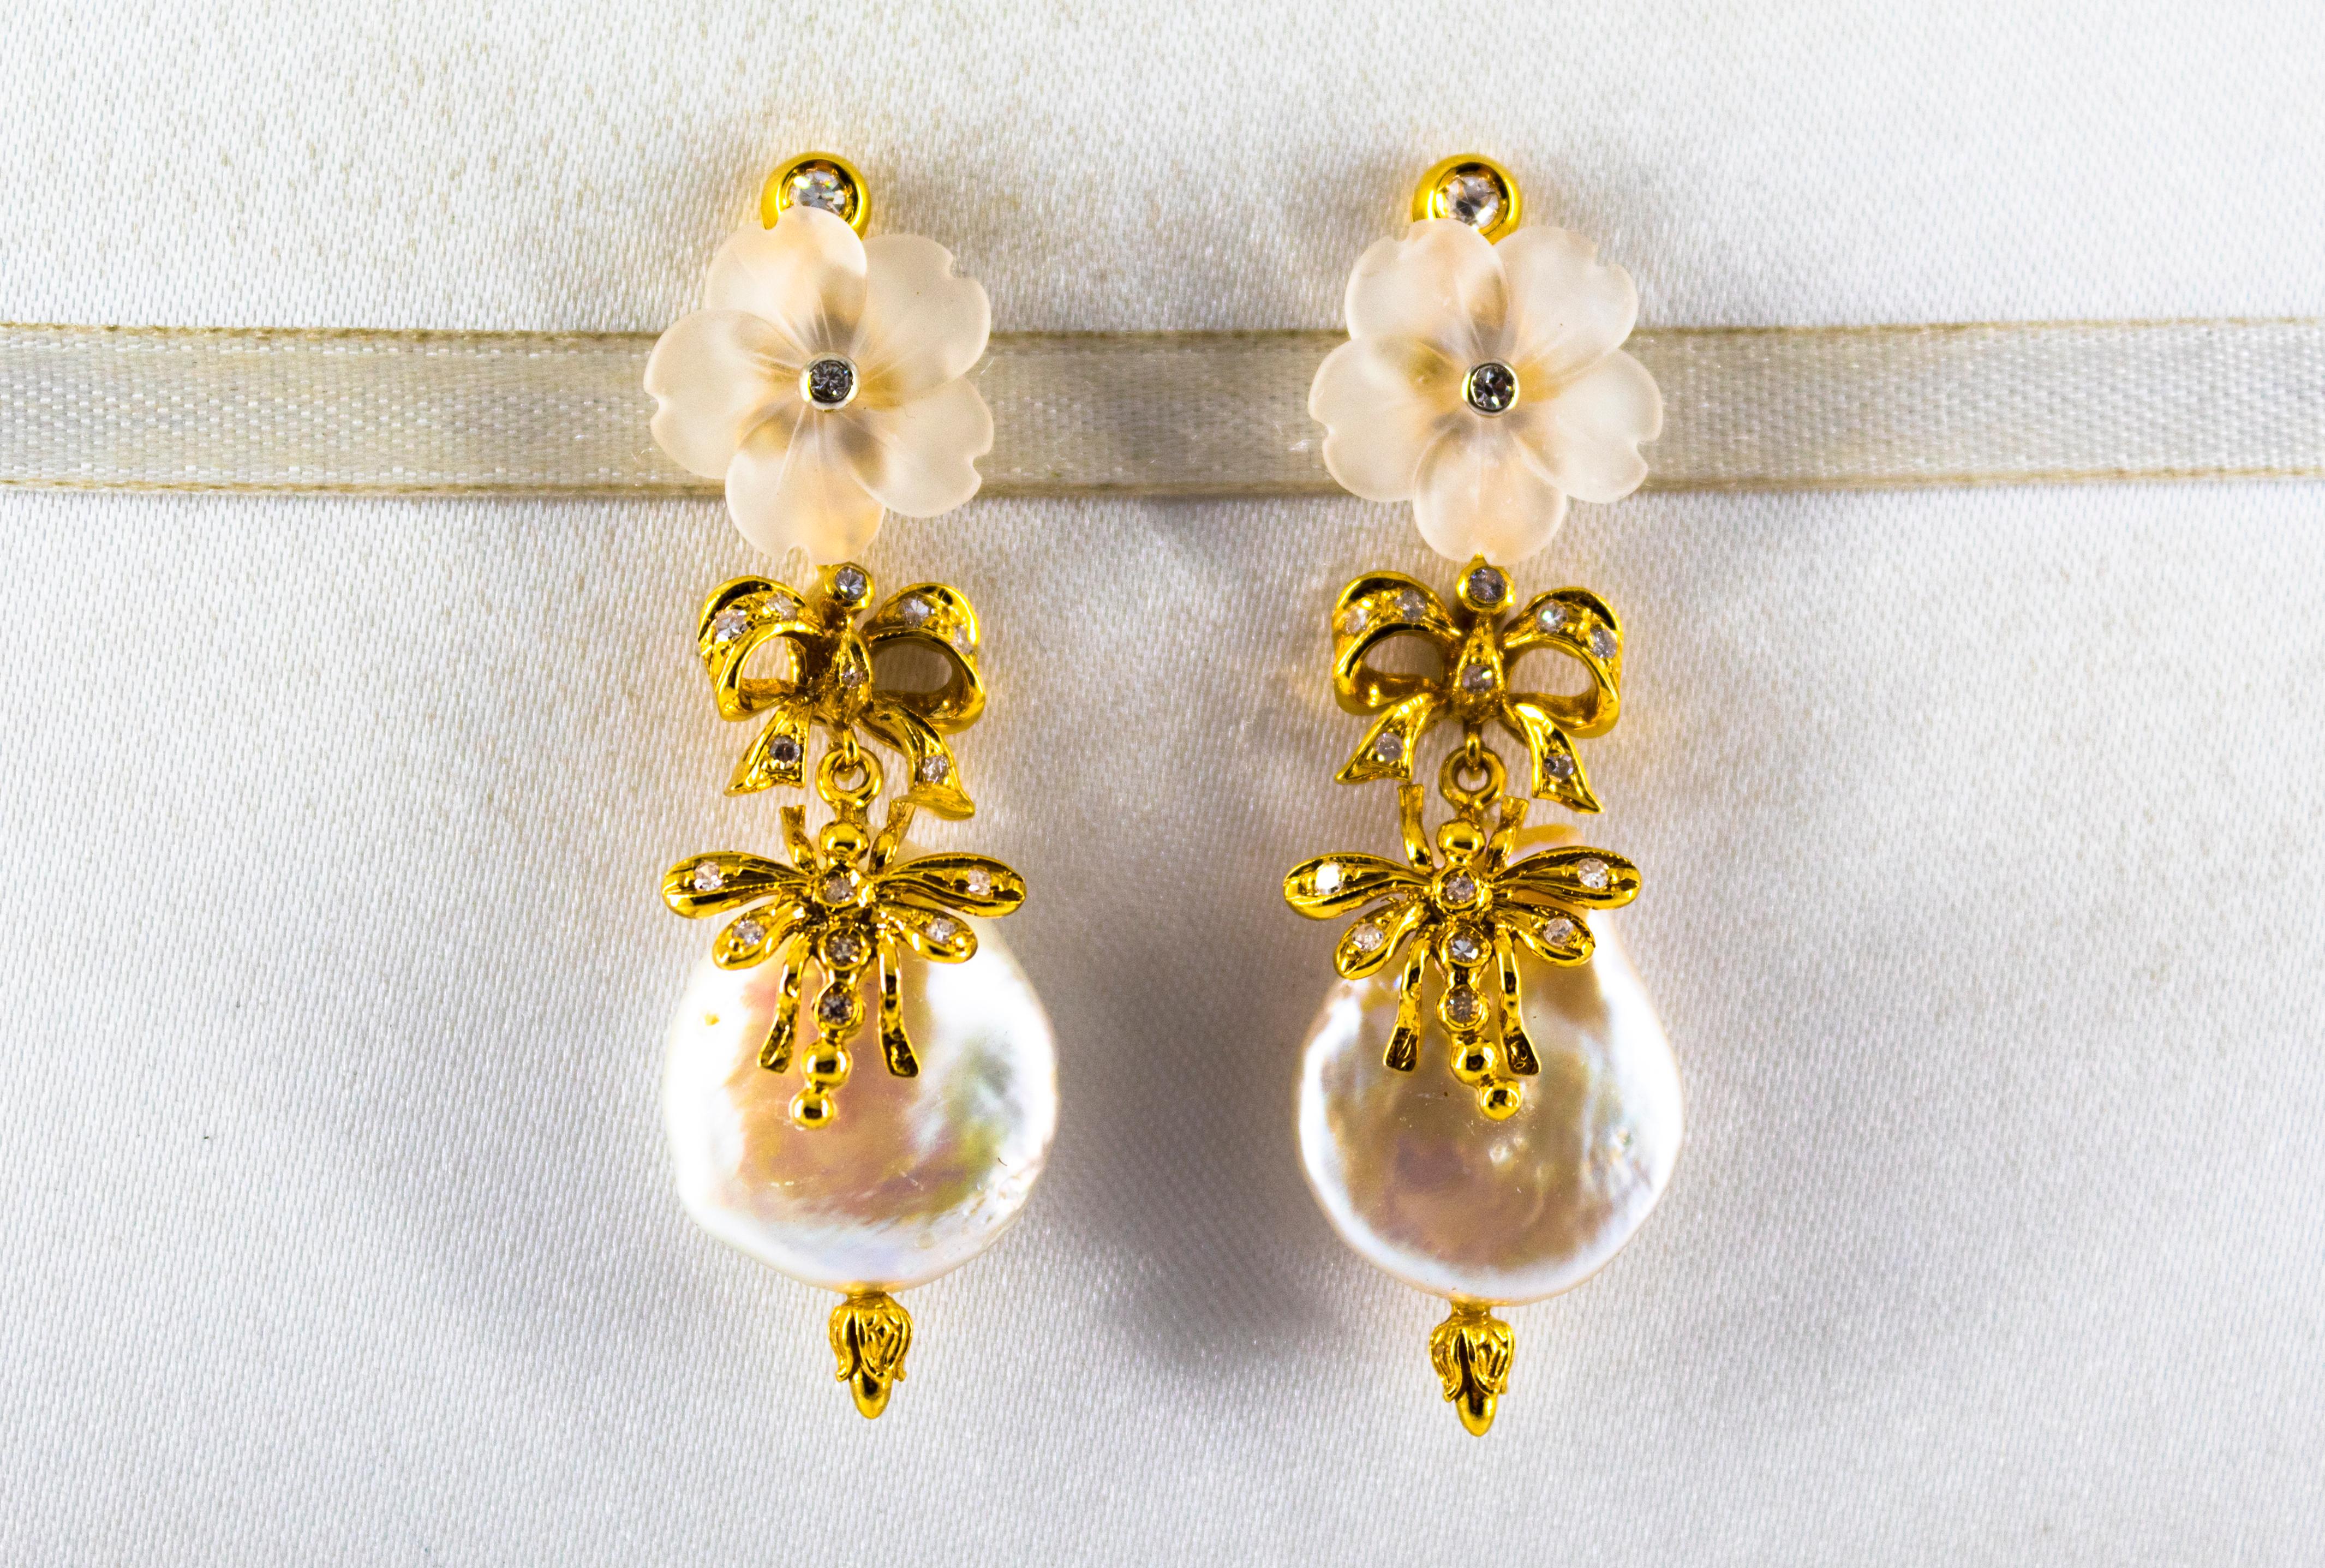 These Stud Earrings are made of 14K Yellow Gold.
These Earrings have 0.40 Carats of White Diamonds.
These Earrings have also Pearls and Rock Crystal.
These Earrings are available also with Green Flowers made of Agate or Purple Flowers made of